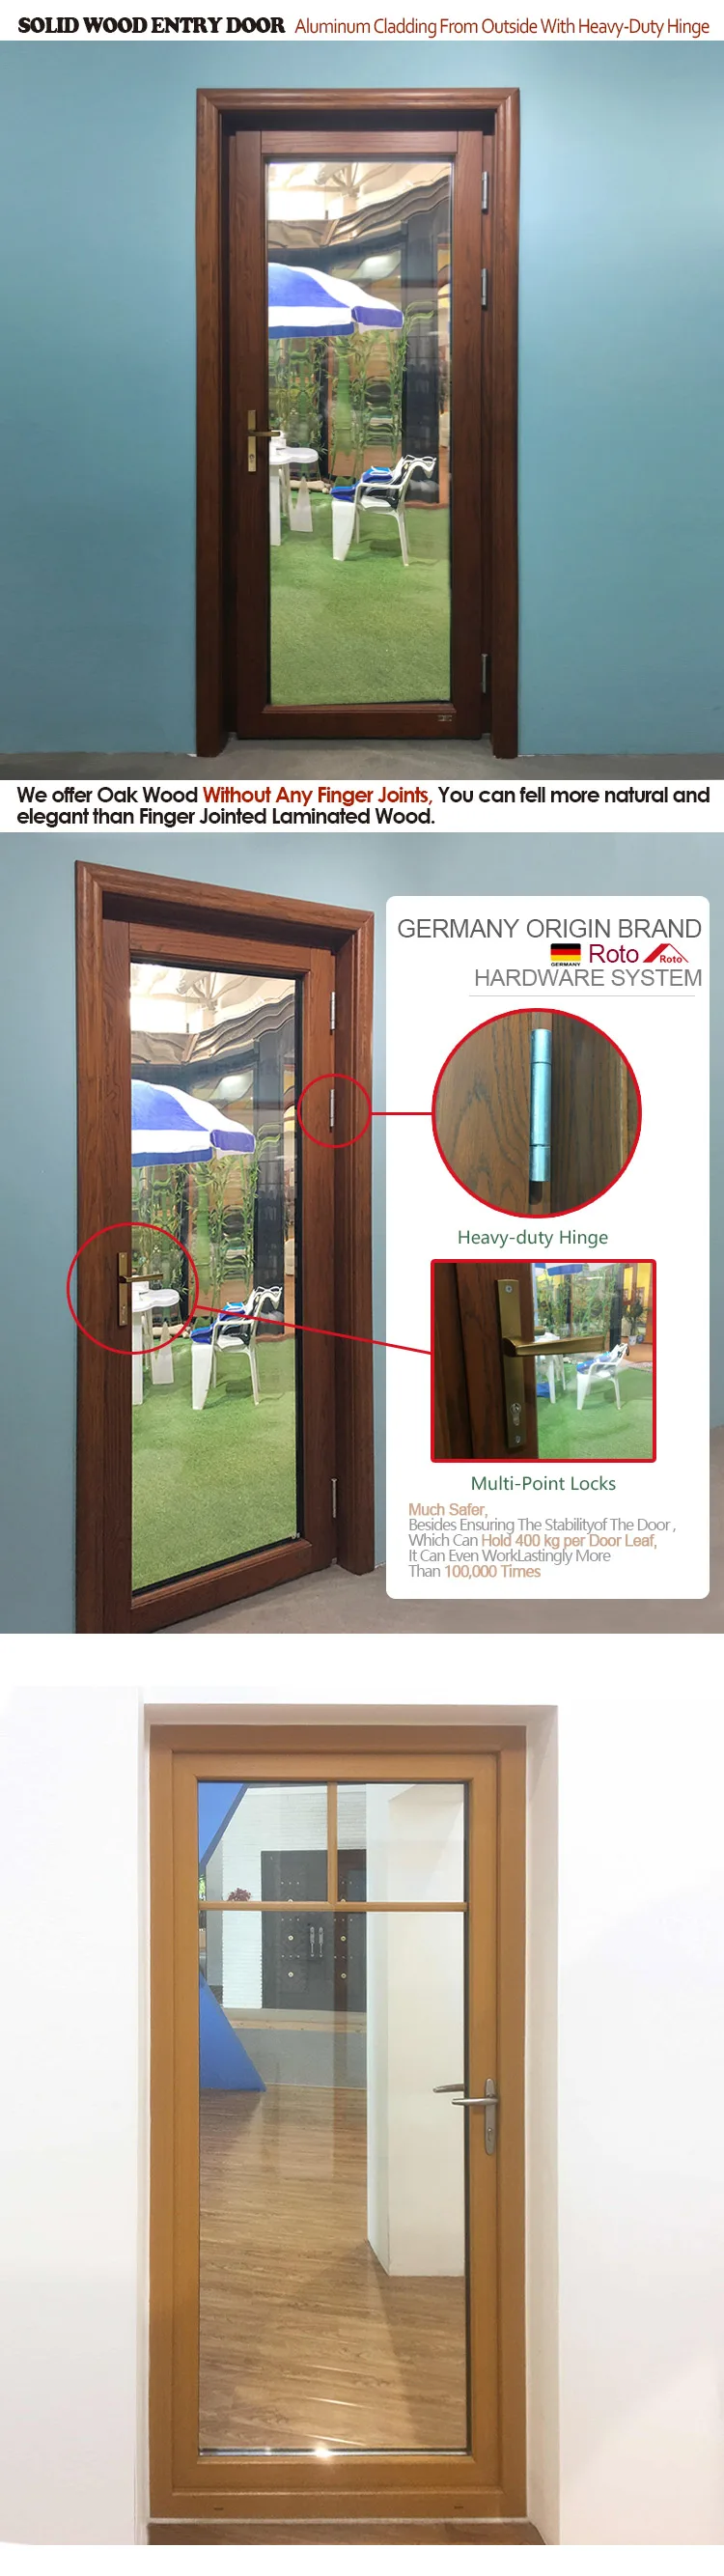 America red oak solid wood material Germany made heavy Duty hardware hinge sound proof entry casement doors